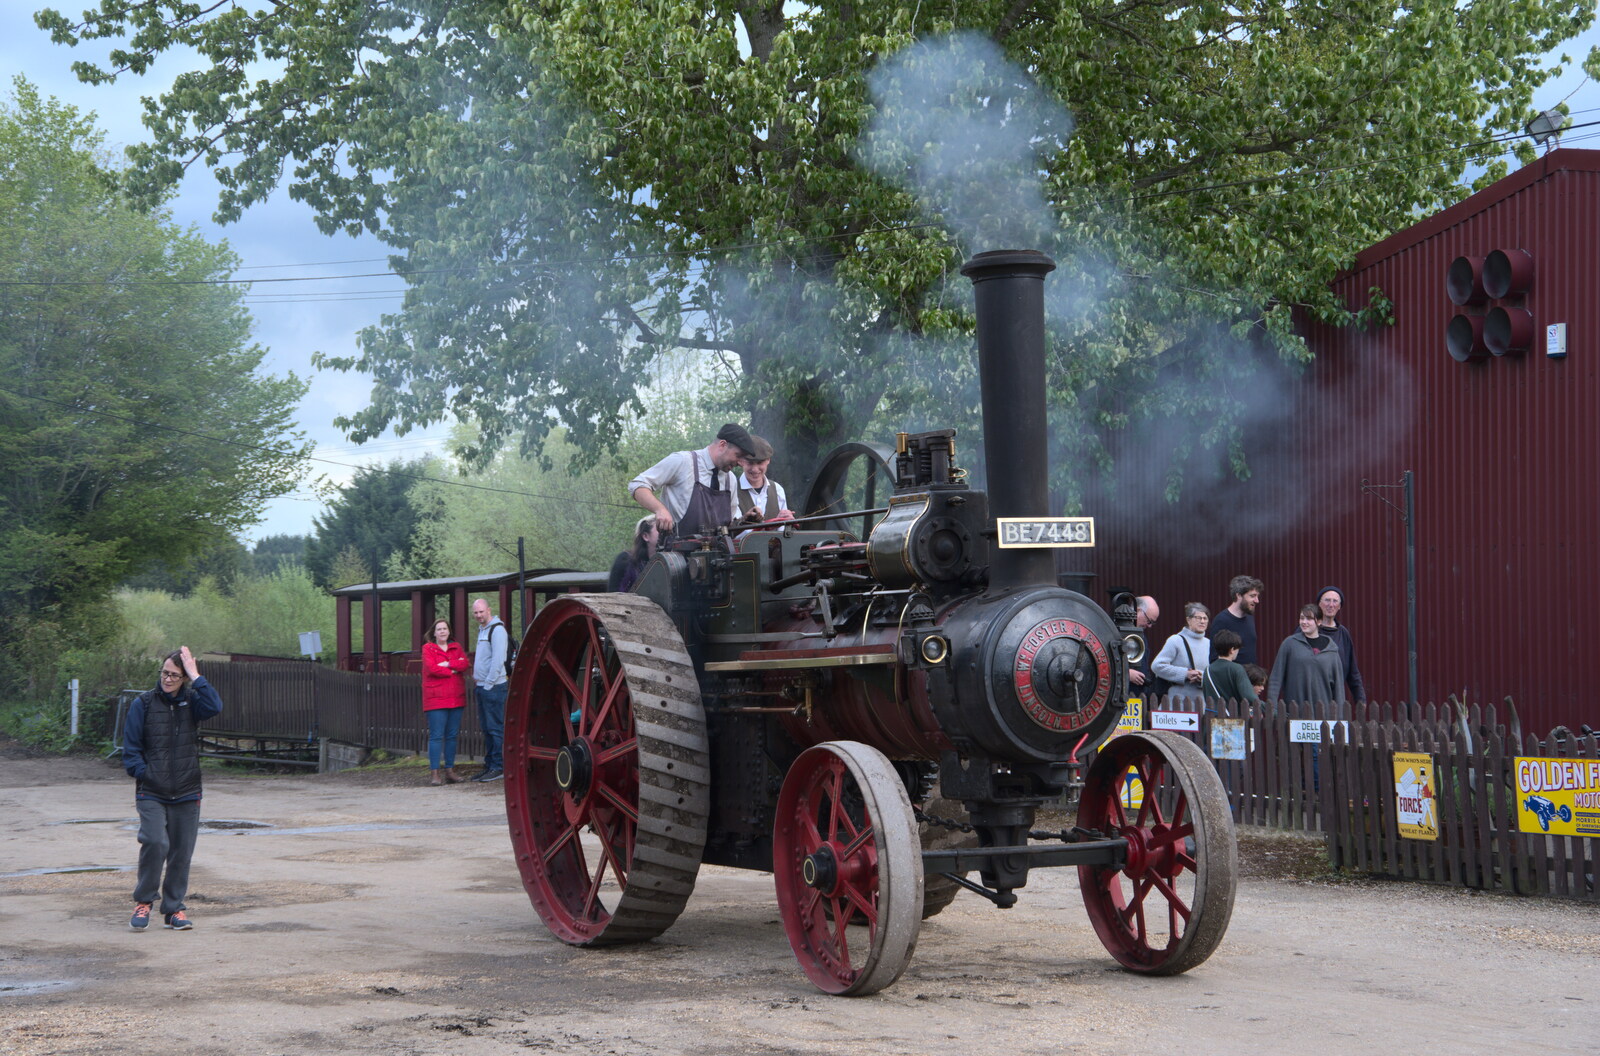 The traction engine is still trundling around from The Heritage Steam Gala, Bressingham Steam Museum, Norfolk - 1st May 2023